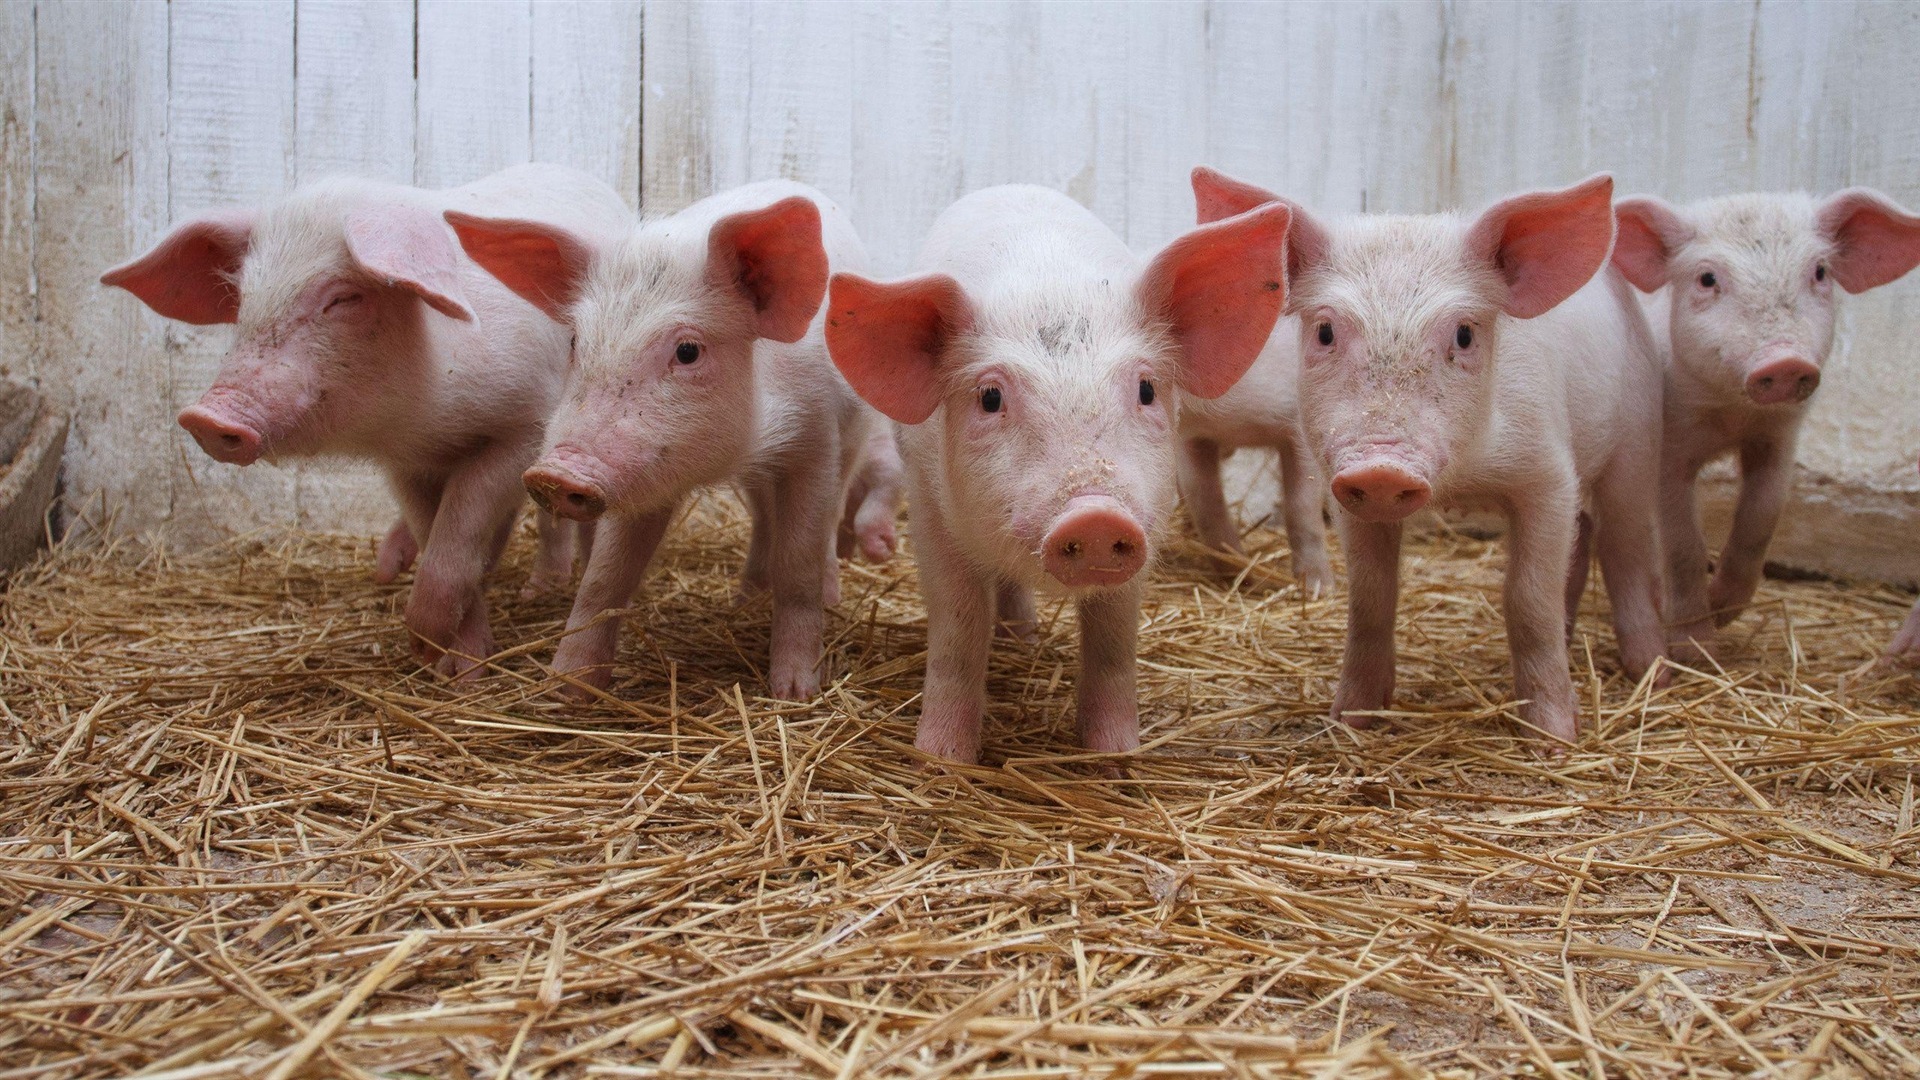 Pig Year about pigs HD wallpapers #5 - 1920x1080